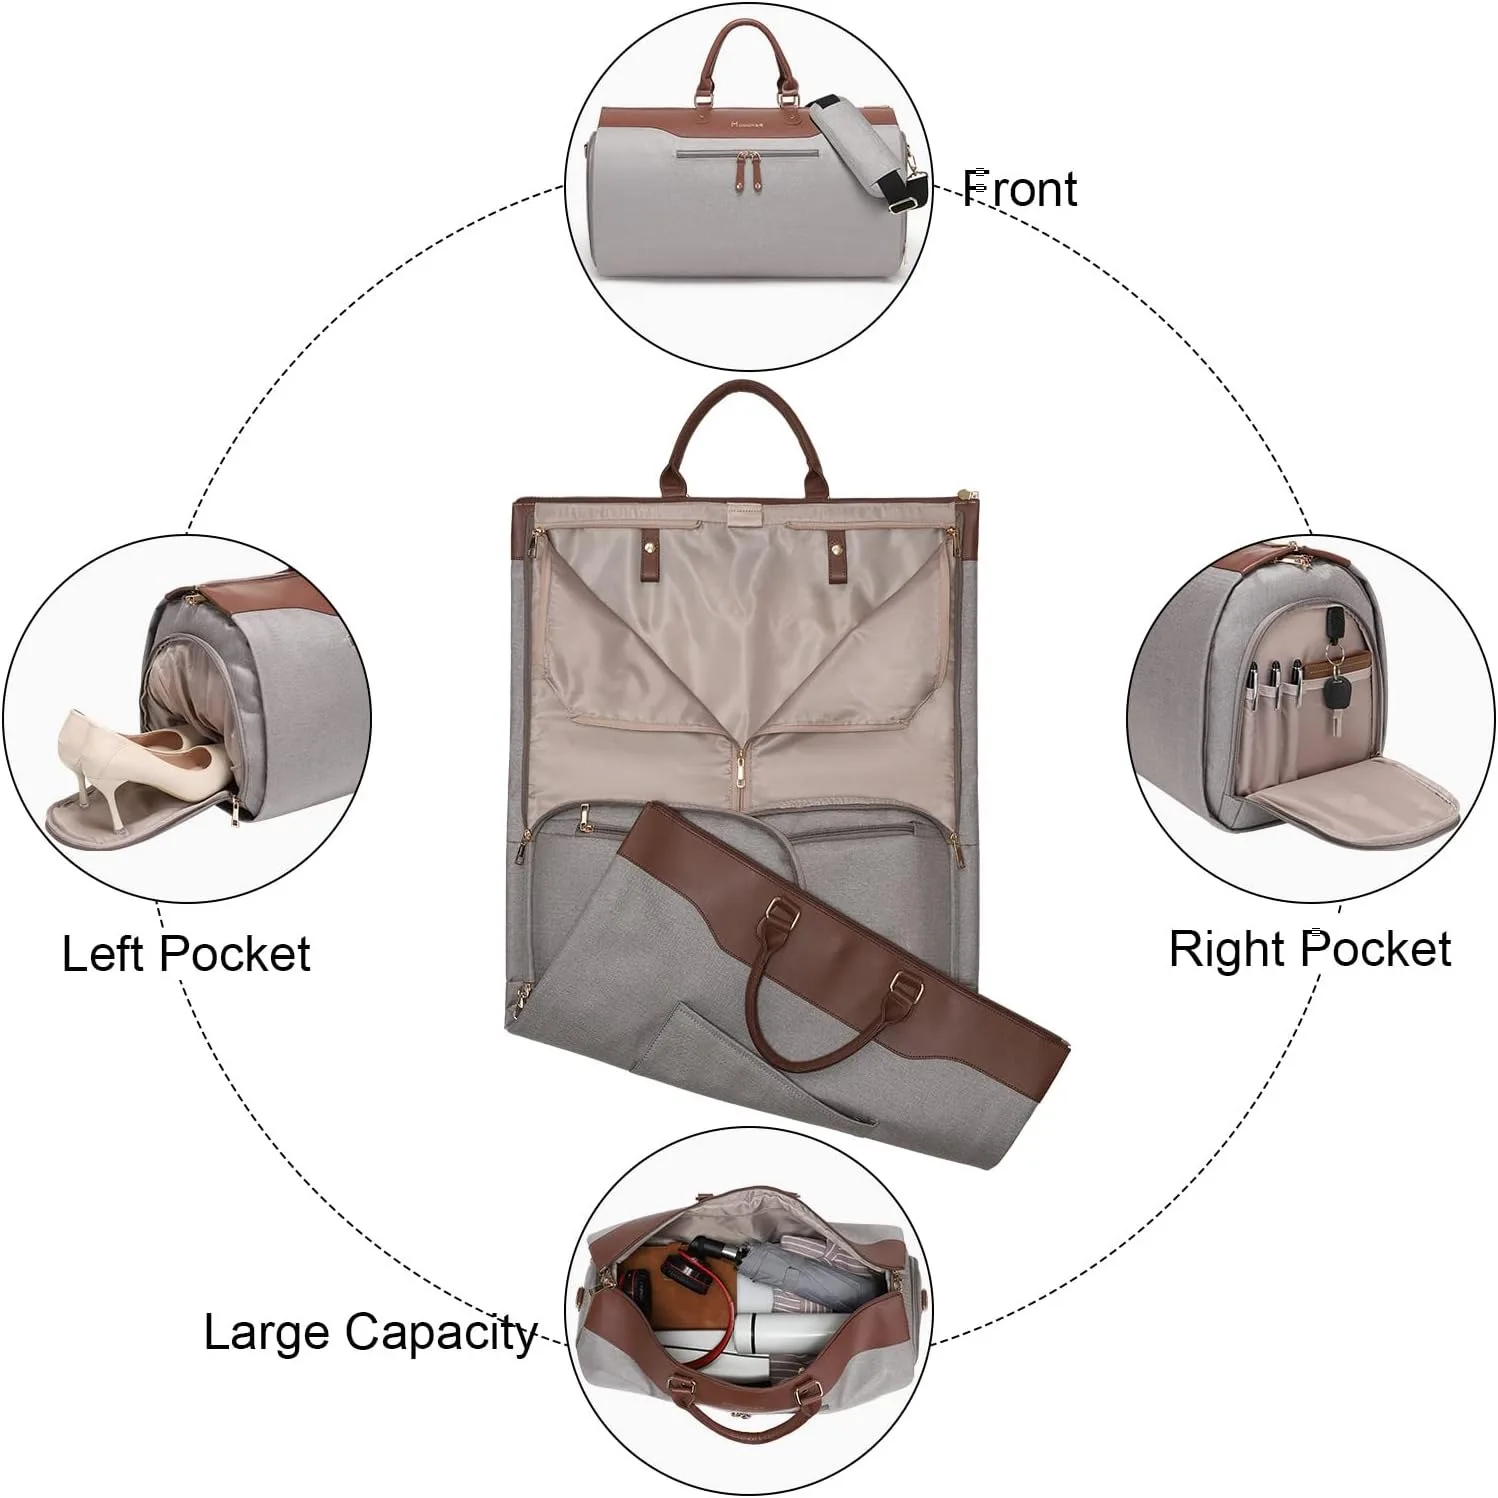 

Leather Foldable Duffle Bag Suit Travel Bag Waterproof Extra Large Weekend Bag Portable Flight Bag with Shoe for Men Women tote